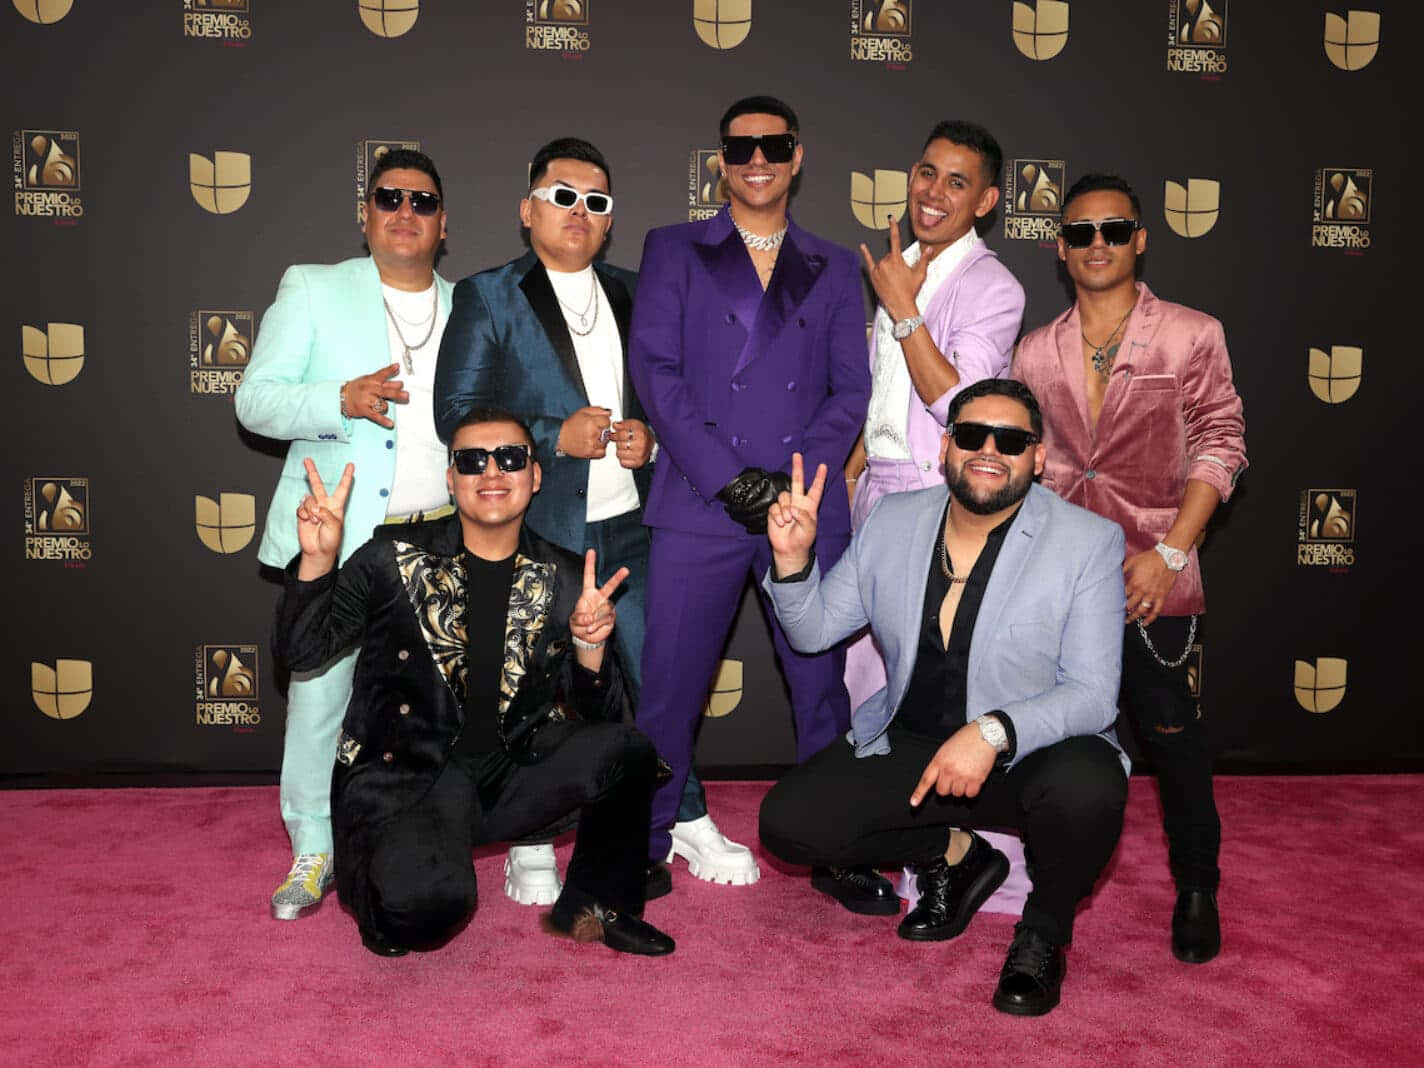 A Group Of Men In Suits Posing For A Photo On The Red Carpet Wallpaper